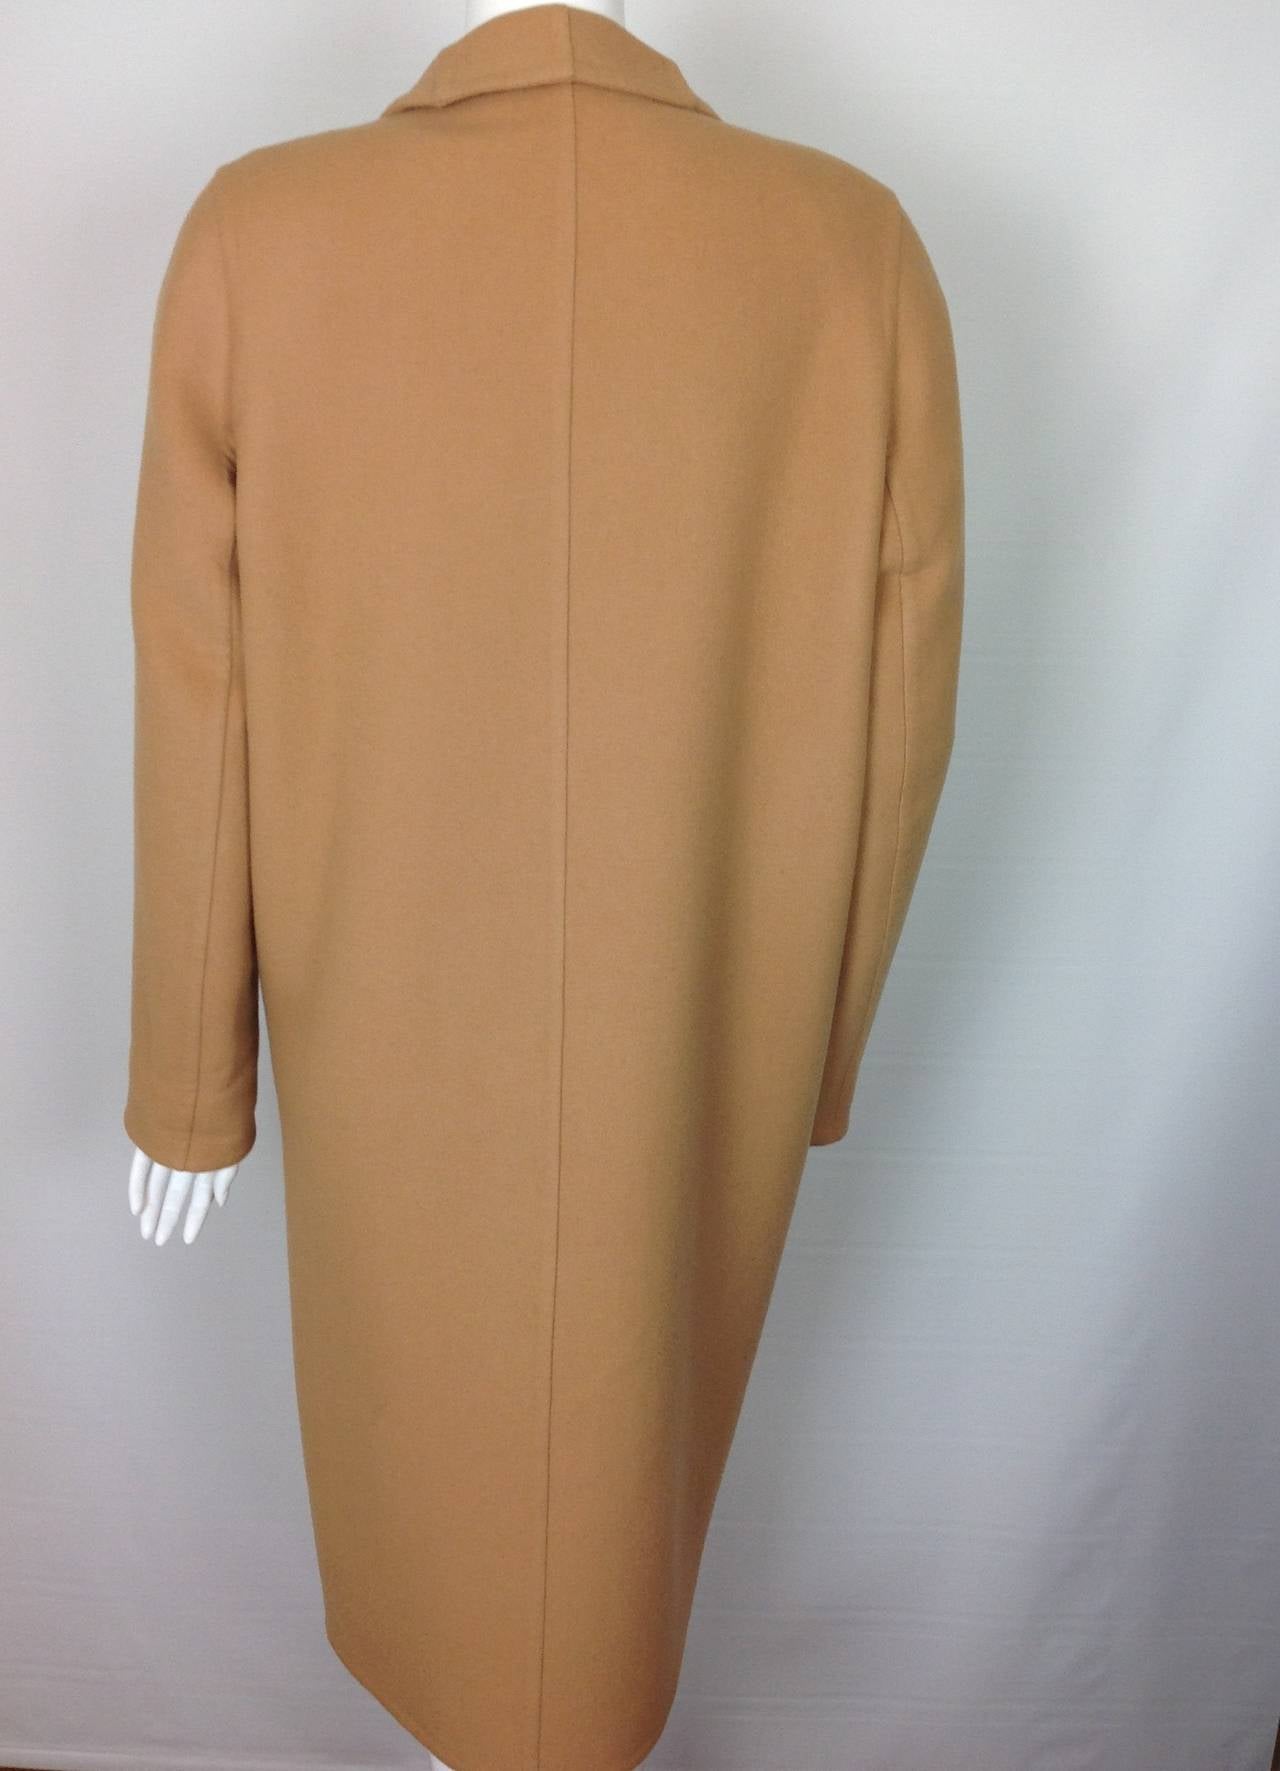 Currently on Hermes website...for $6650!
Double faced Cashmere wrap coat.  Self lined.
Hermes calls it kraft beige, we call it butterscotch...Yummy!
Small tab and button closure inside.  Single rose goldtone metal stud framed by butterscotch